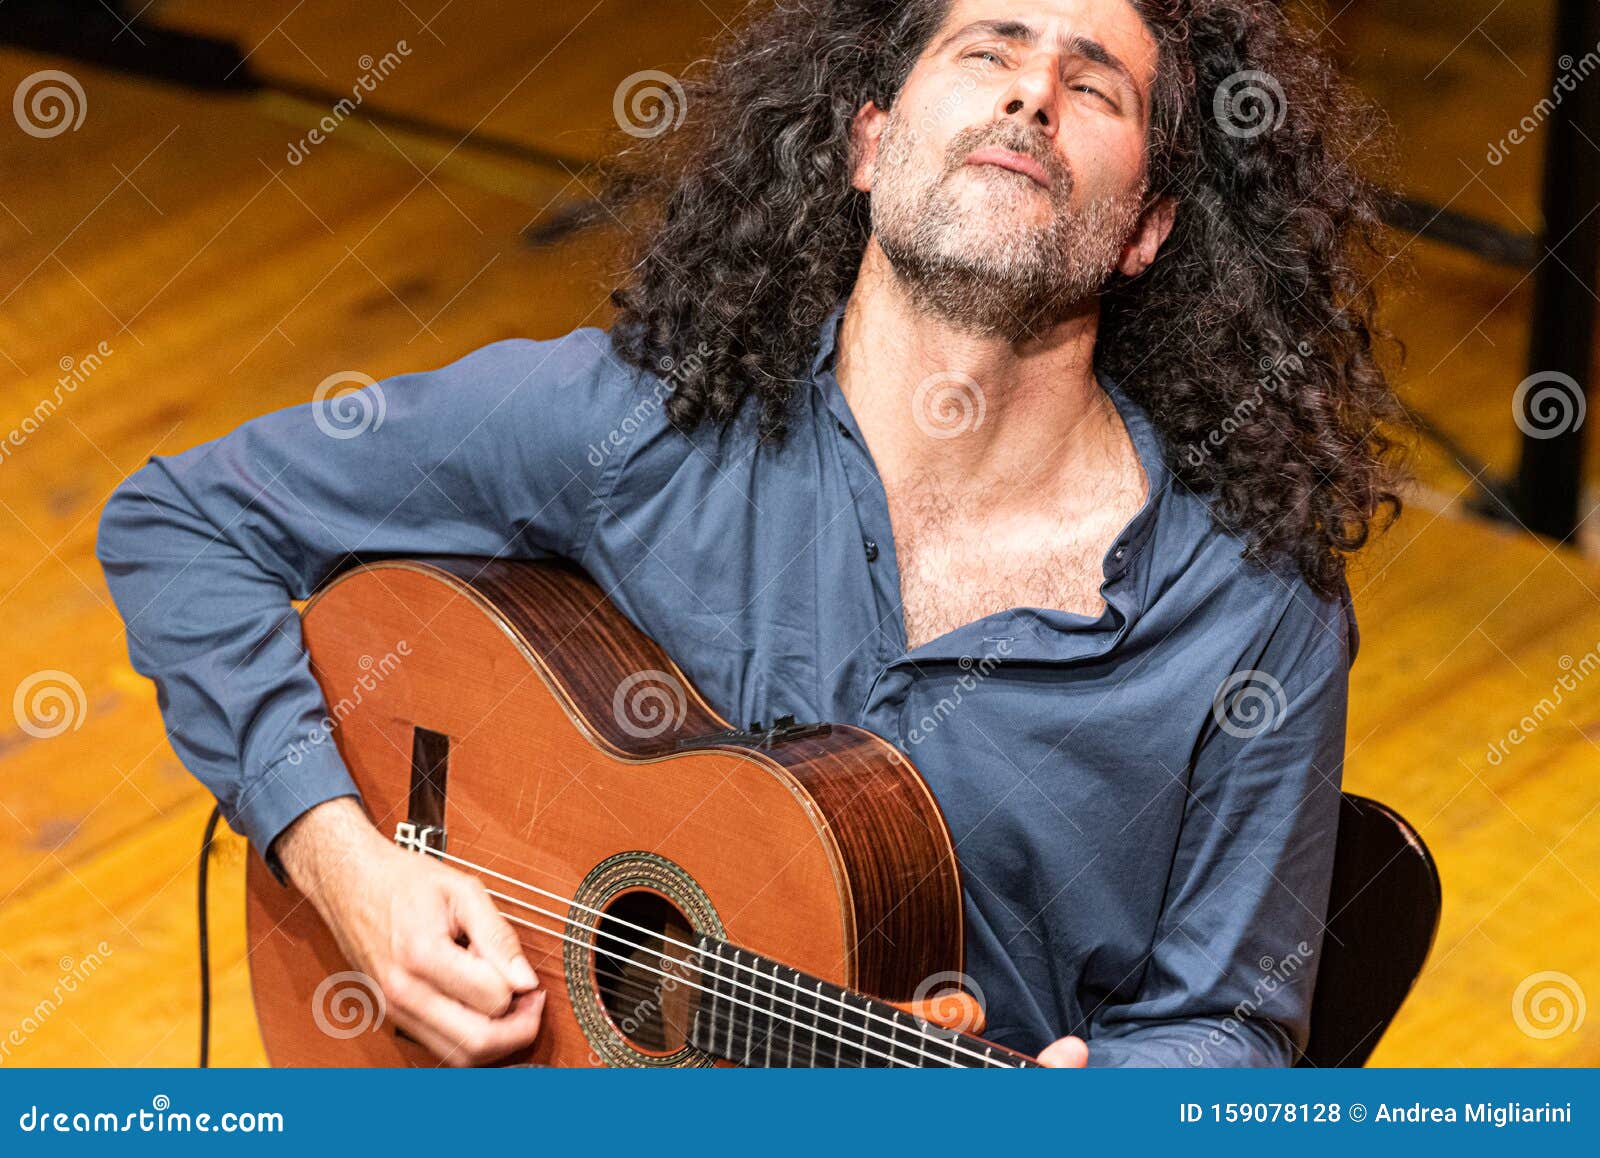 Handsome Man with Long Hair Playing Classical Guitar Stock Photo - Image of  player, stage: 159078128